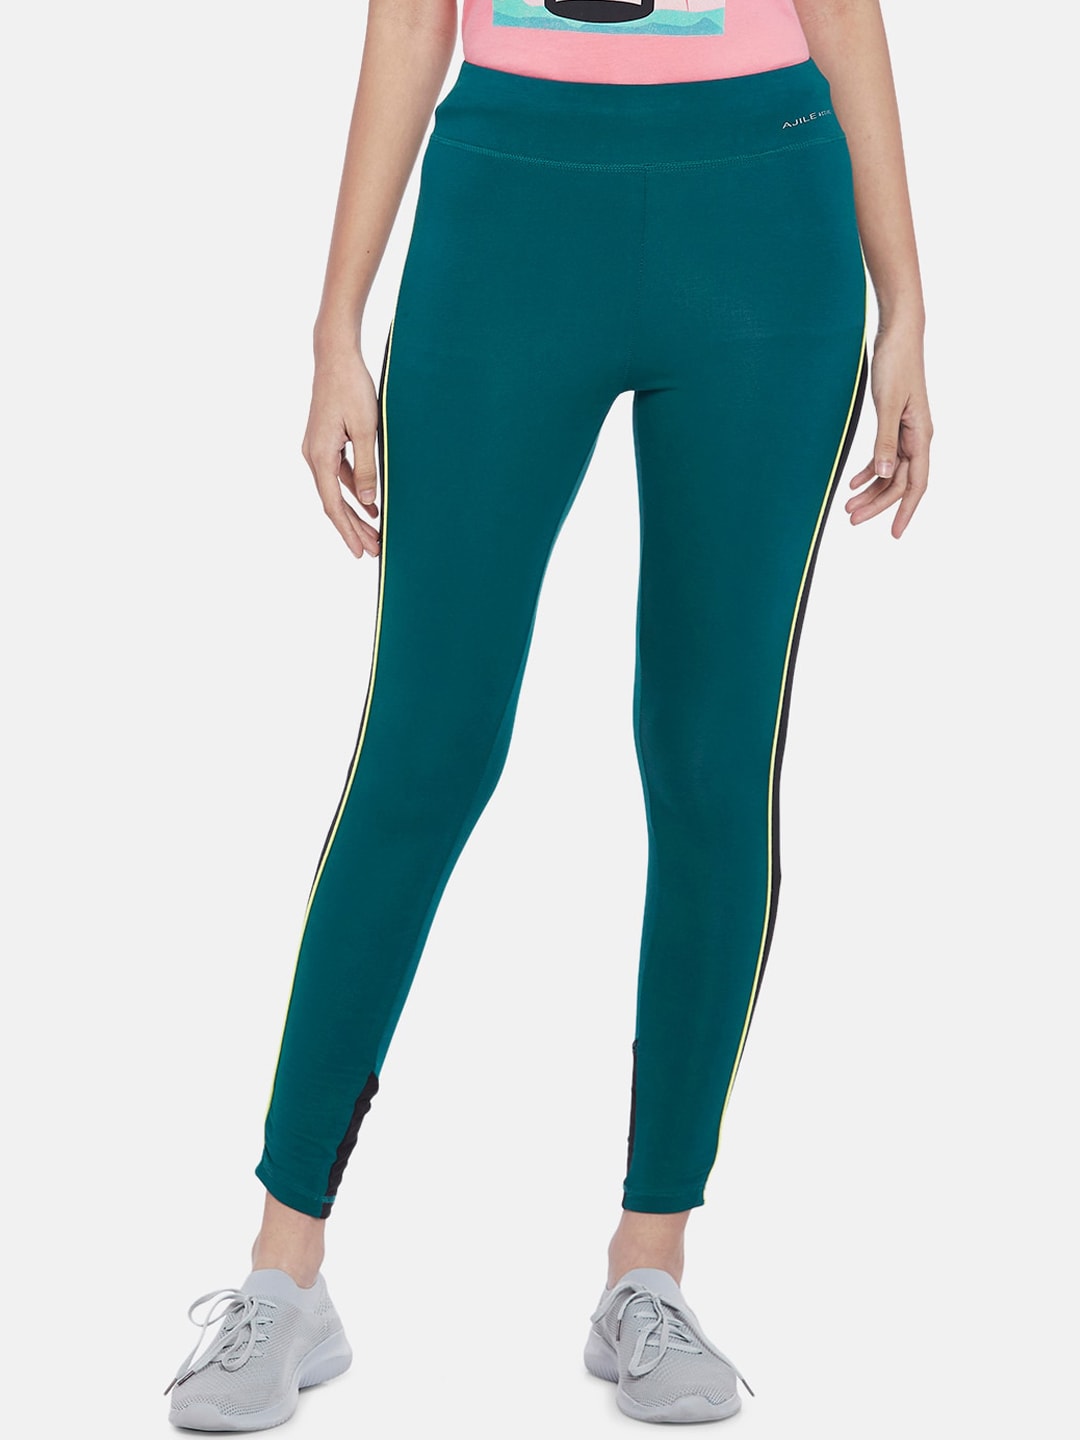 Ajile by Pantaloons Women Teal Green Solid Ankle-Length Sports Tights Price in India